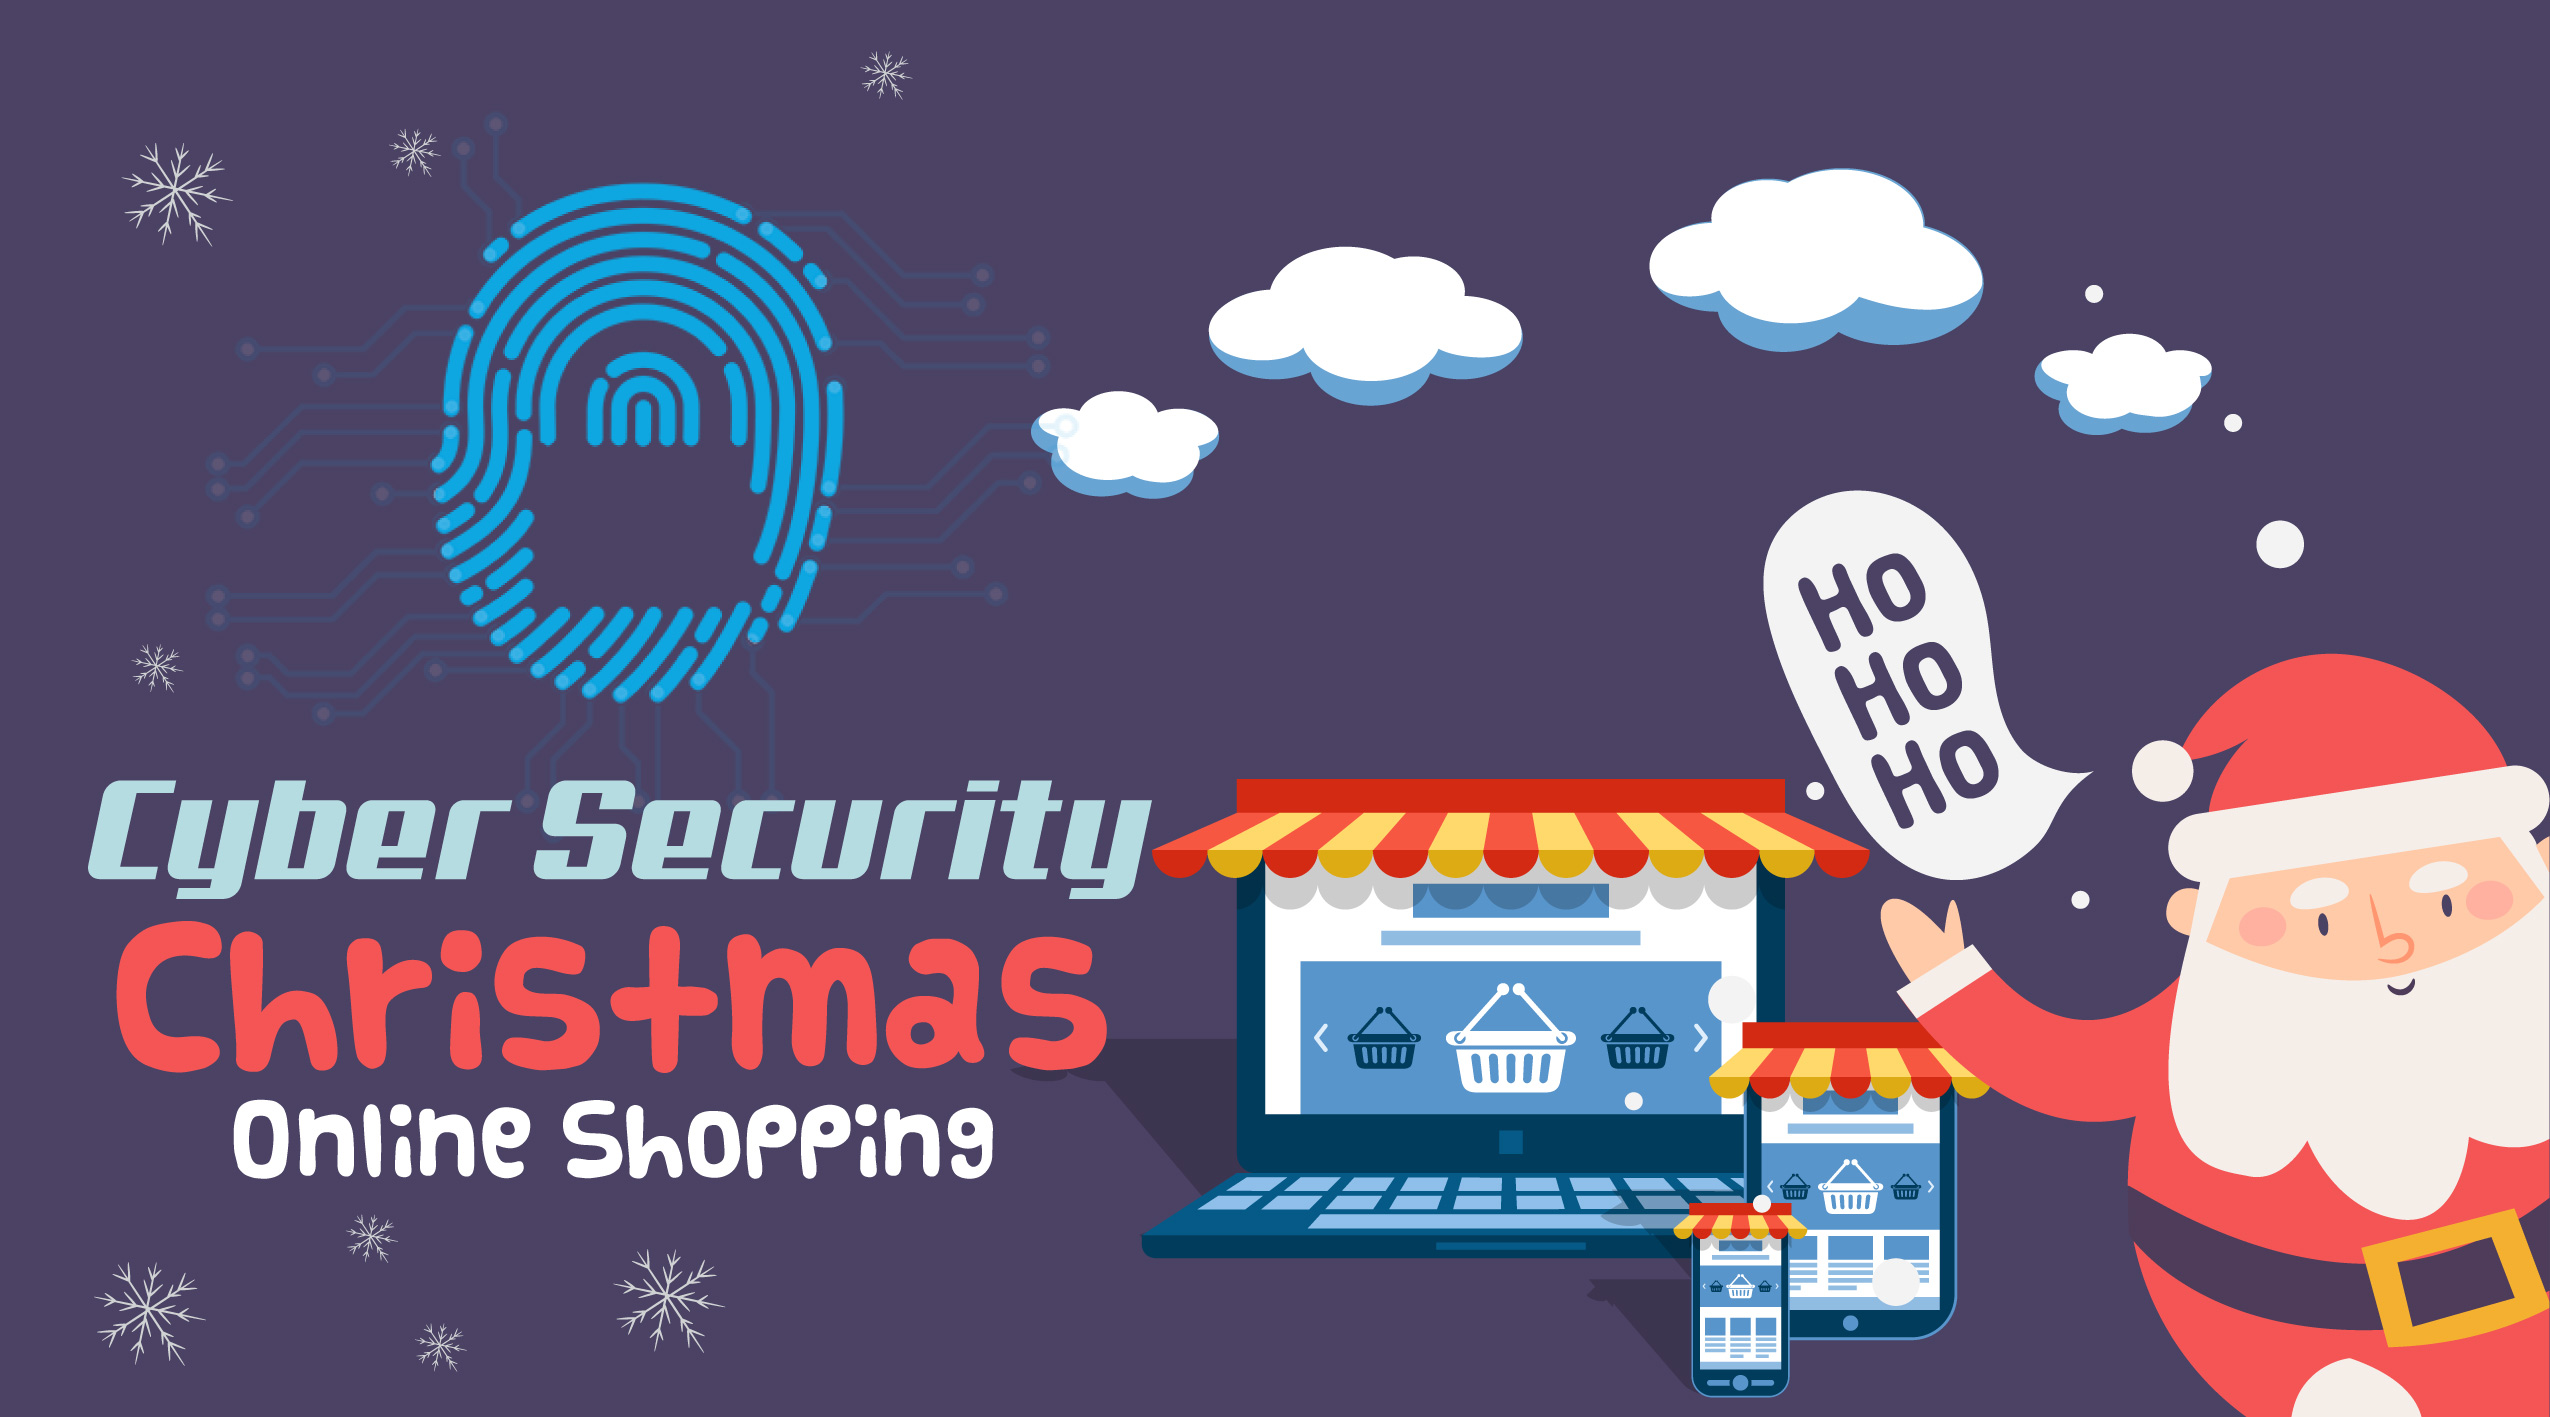 Cyber Security Shopping during the Holiday Season in Fishers, Wetfield and Indianpolis